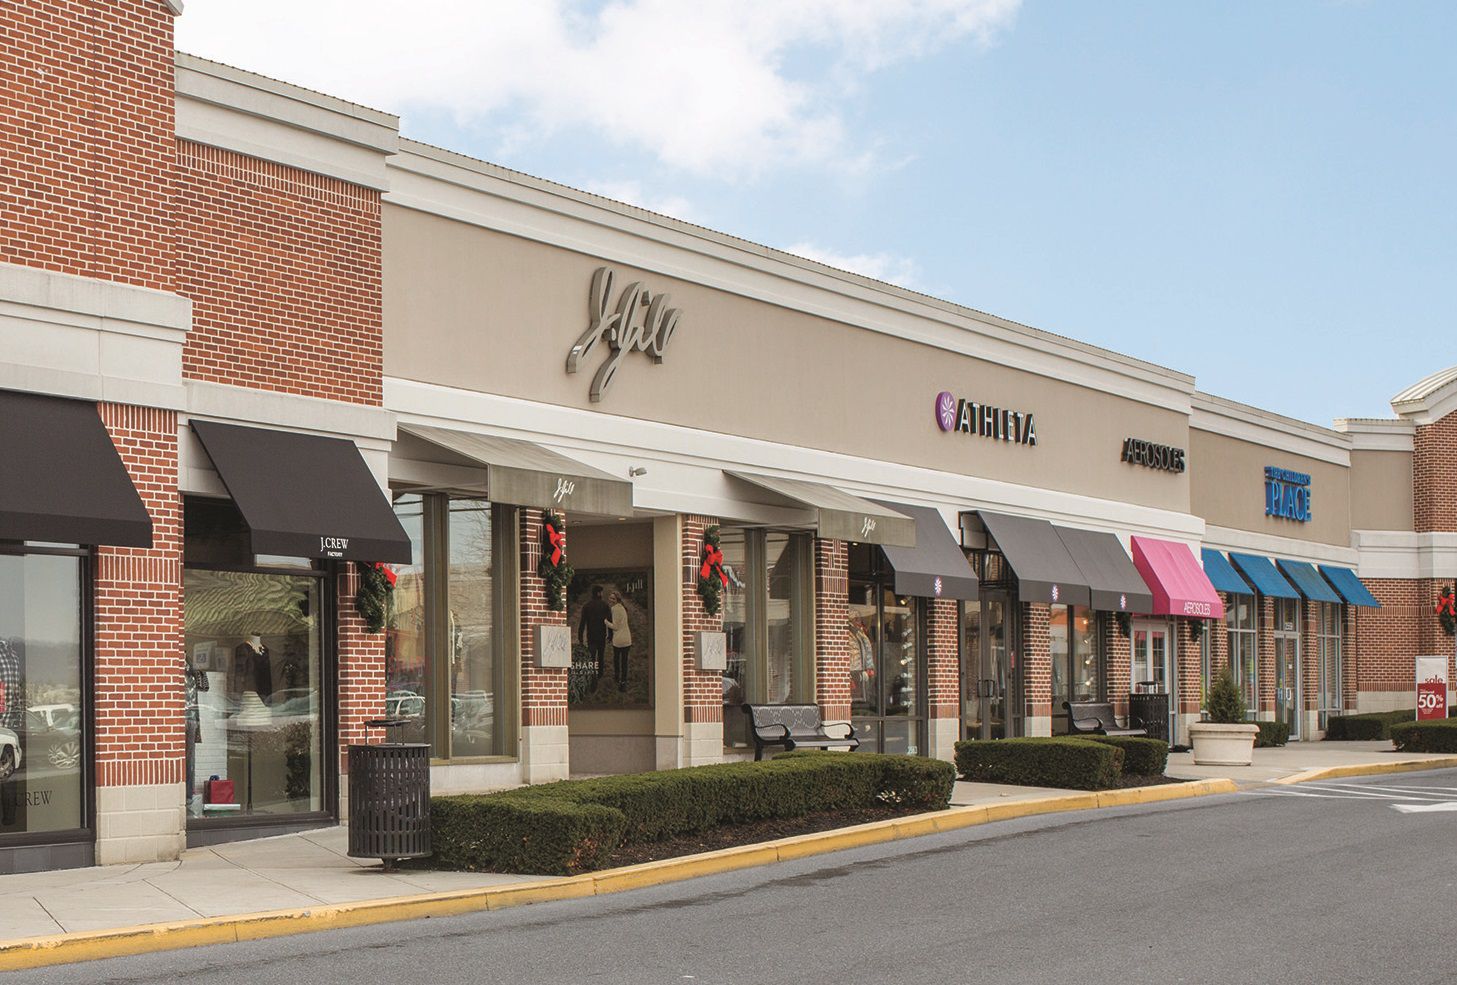 Largest real estate transactions in Dauphin County in 2019: Malls